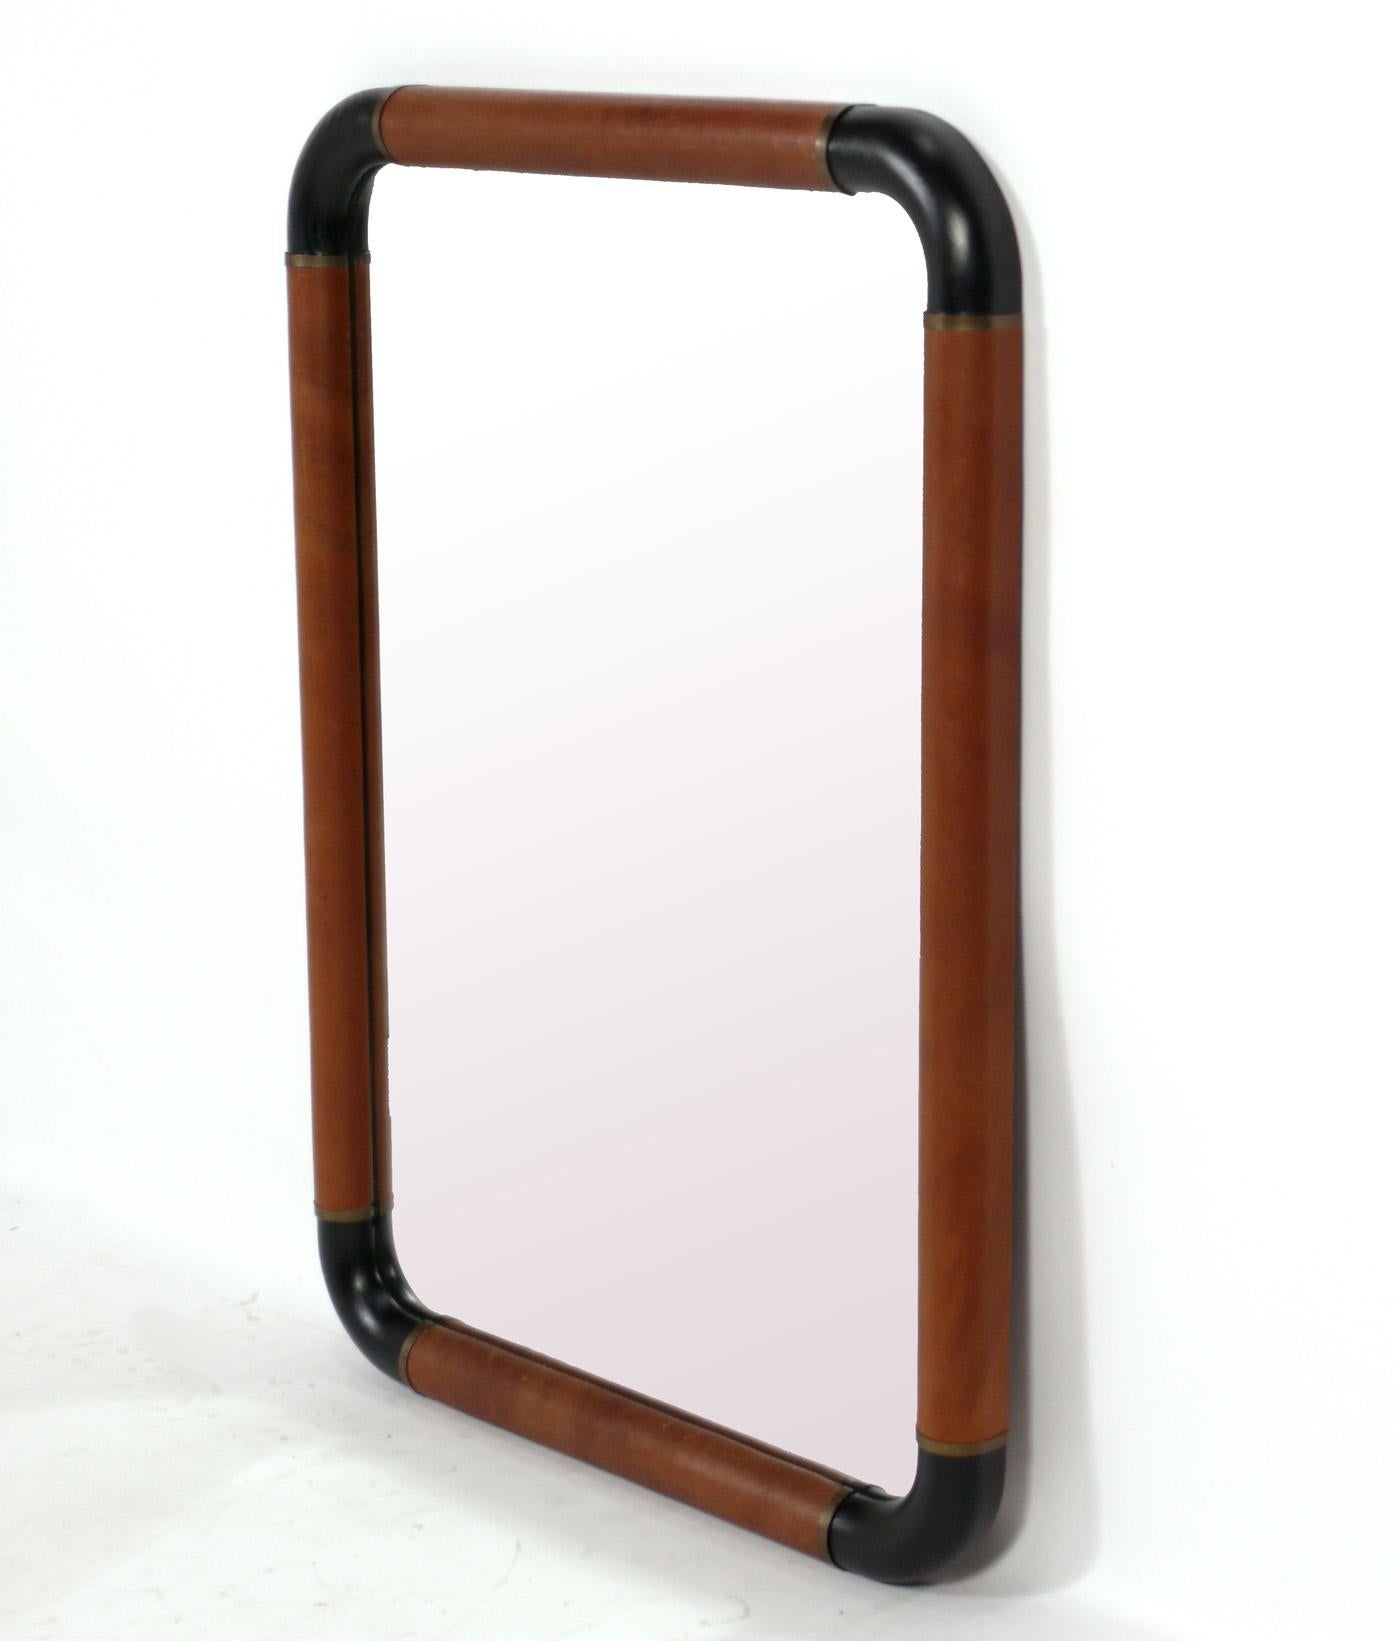 Cognac Leather and Black Oak Mirror with Brass Trim, in the manner of Jacques Adnet, France, circa 1960s. The black stained oak portions have recently been refinished. The cognac leather and brass elements retain their warm original patina. 